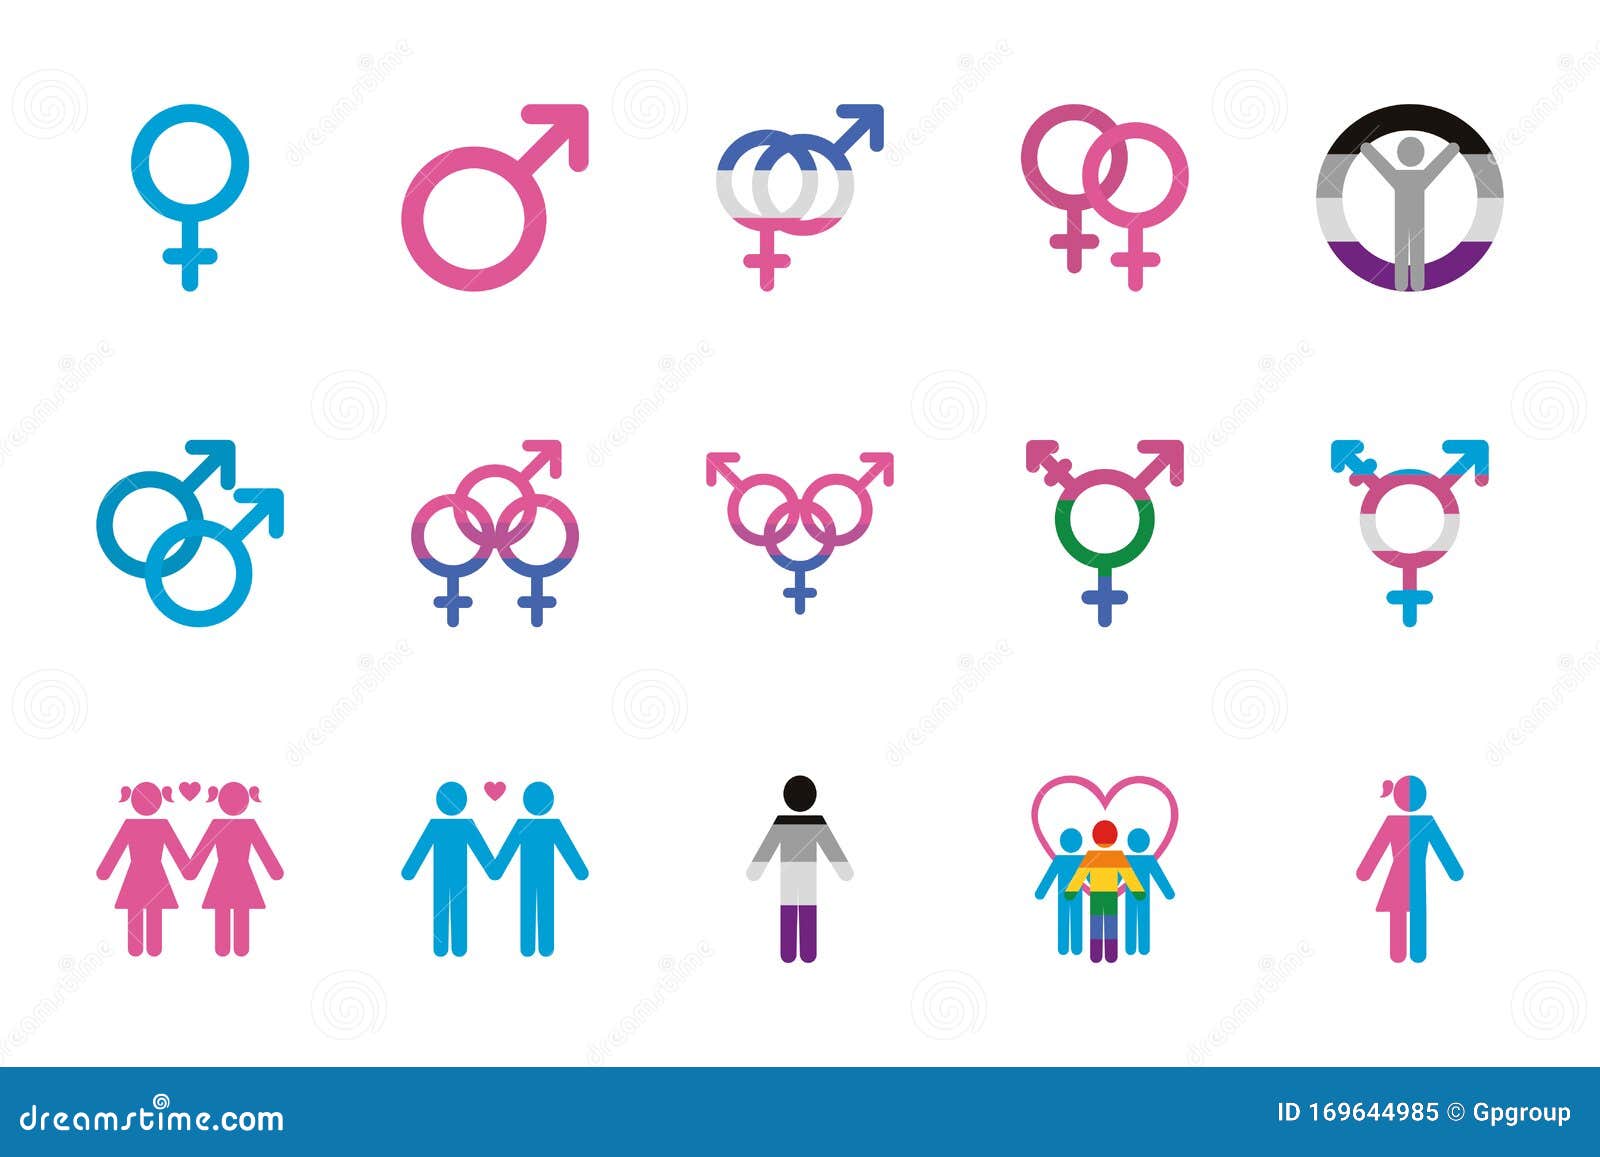 Isolated Lgtbi Icon Set Vector Design Stock Vector Illustration Of Diversity Sexuality 169644985